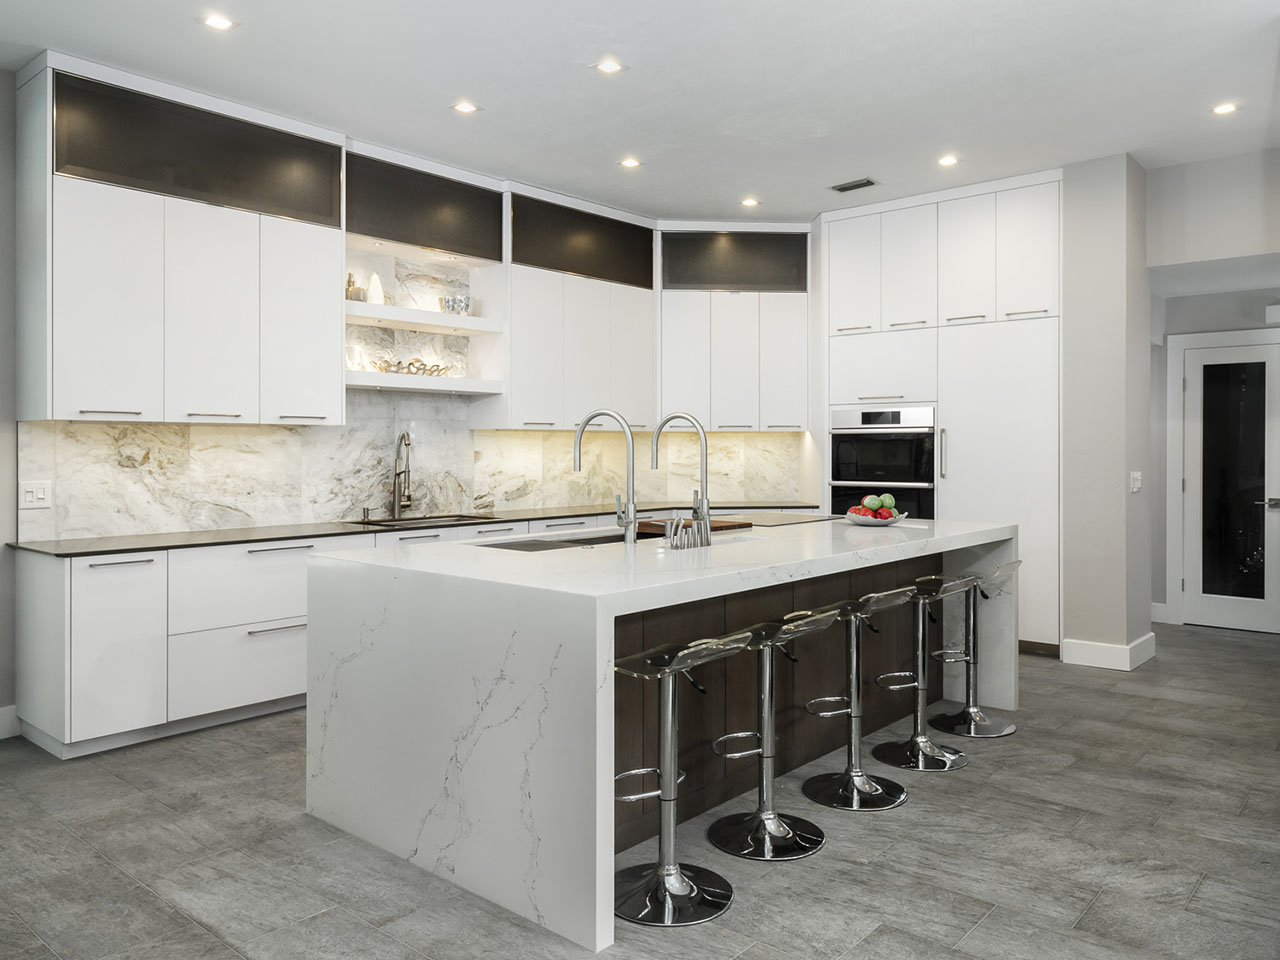 All About Countertops for Kitchen and Bath Design